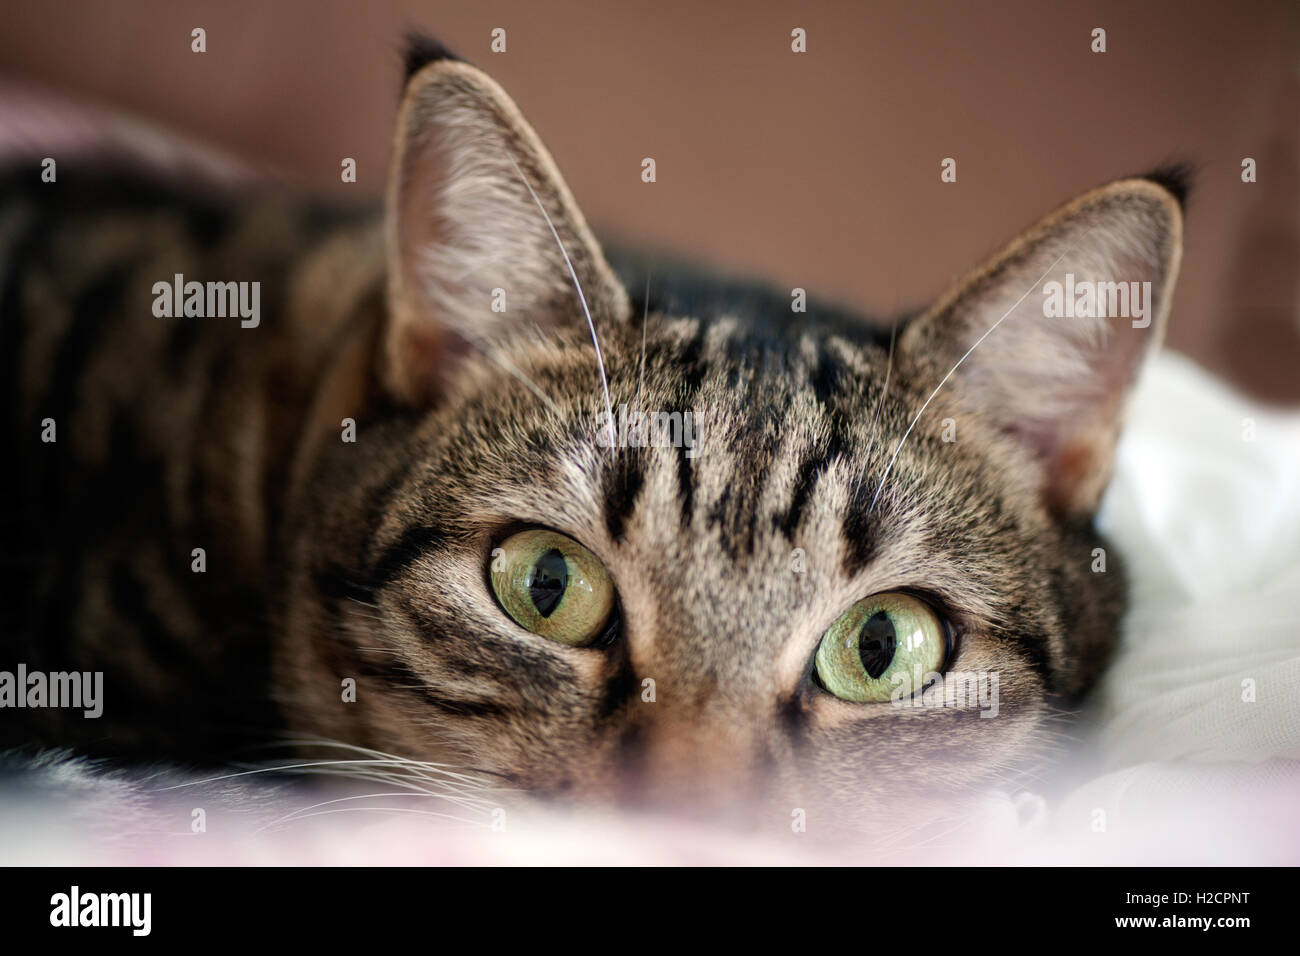 Close up portrait of tabby cat looking at camera Stock Photo